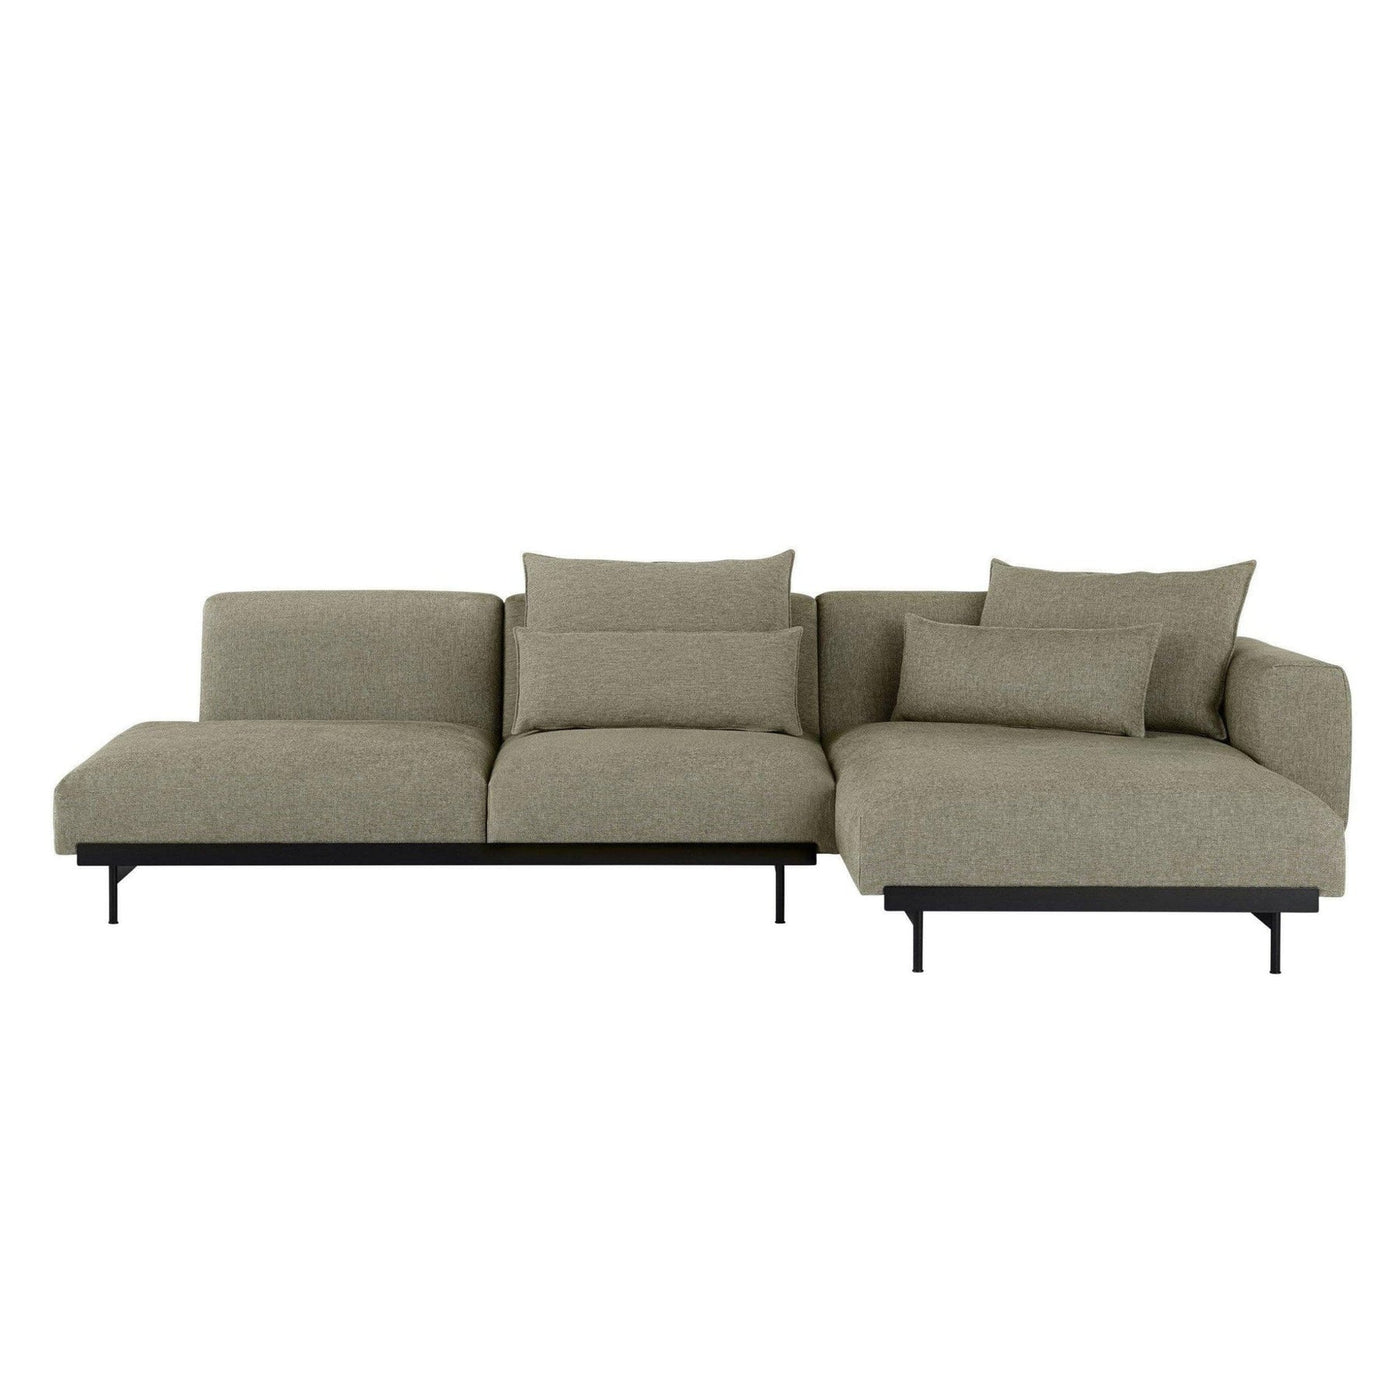 Muuto In Situ Sofa 3 seater configuration 8 in clay 15 fabric. Made to order at someday designs. #colour_clay-15